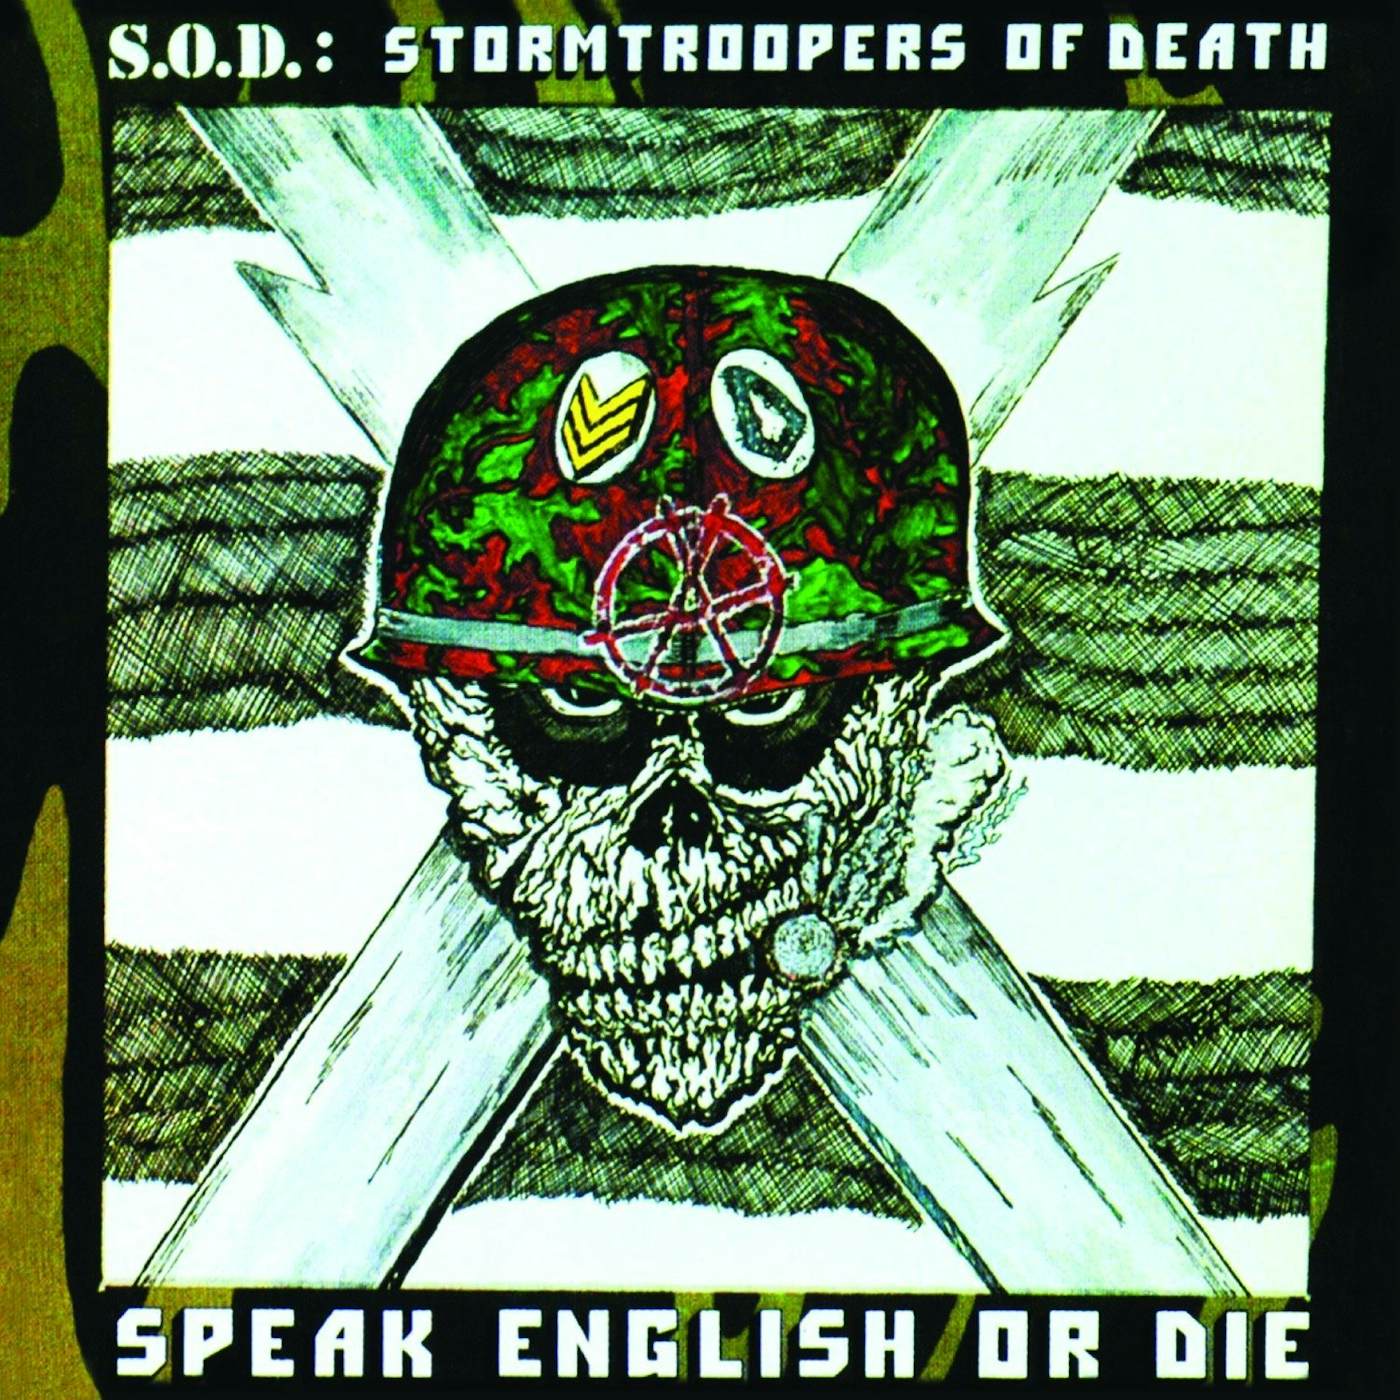 S.O.D. SPEAK ENGLISH OR DIE (30TH ANNIVERSARY EDITION) CD